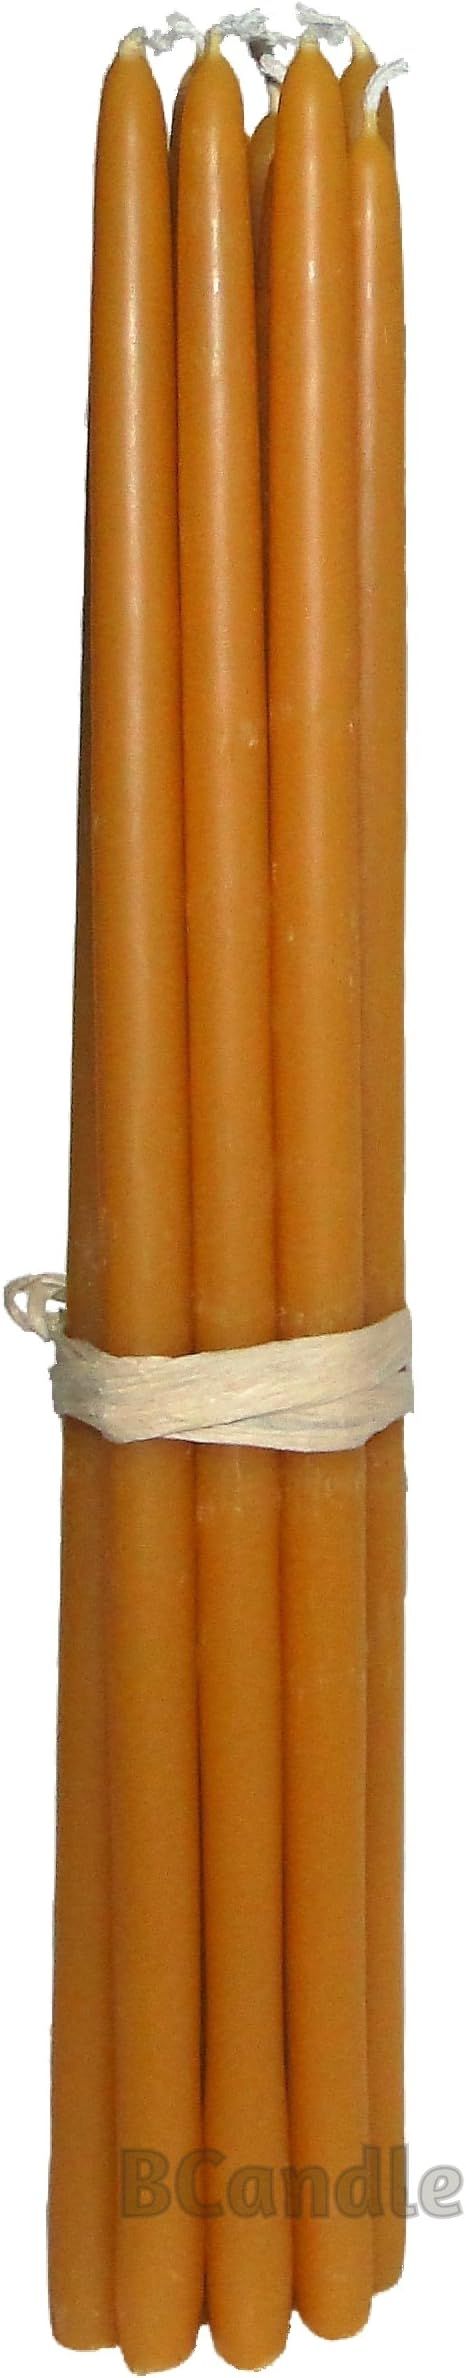 BCandle 100% Beeswax 6-Hour Candles (Set of 6) Organic Hand Made - 11 Inches Tall, 1/2 Inch Thick... | Amazon (US)